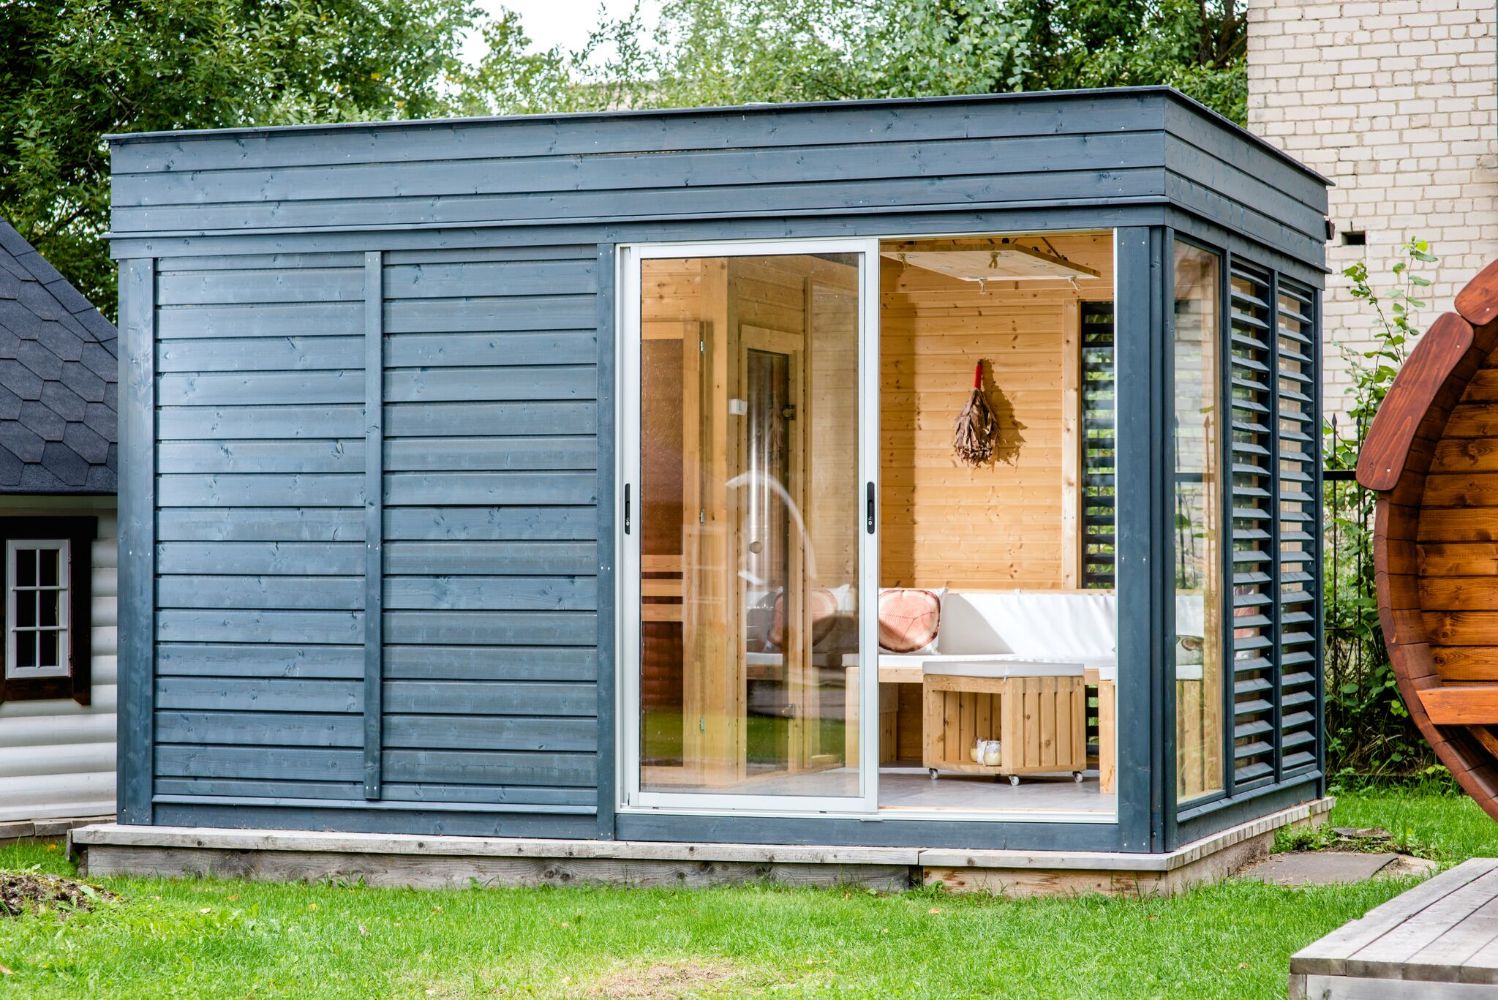 Grill Houses, Glamping Pods & Sauna Barrels With FREE Delivery* Plus Luxury Hot Tubs, Home Offices, Tool Cabinets, Garden Dining Sets, Tools..